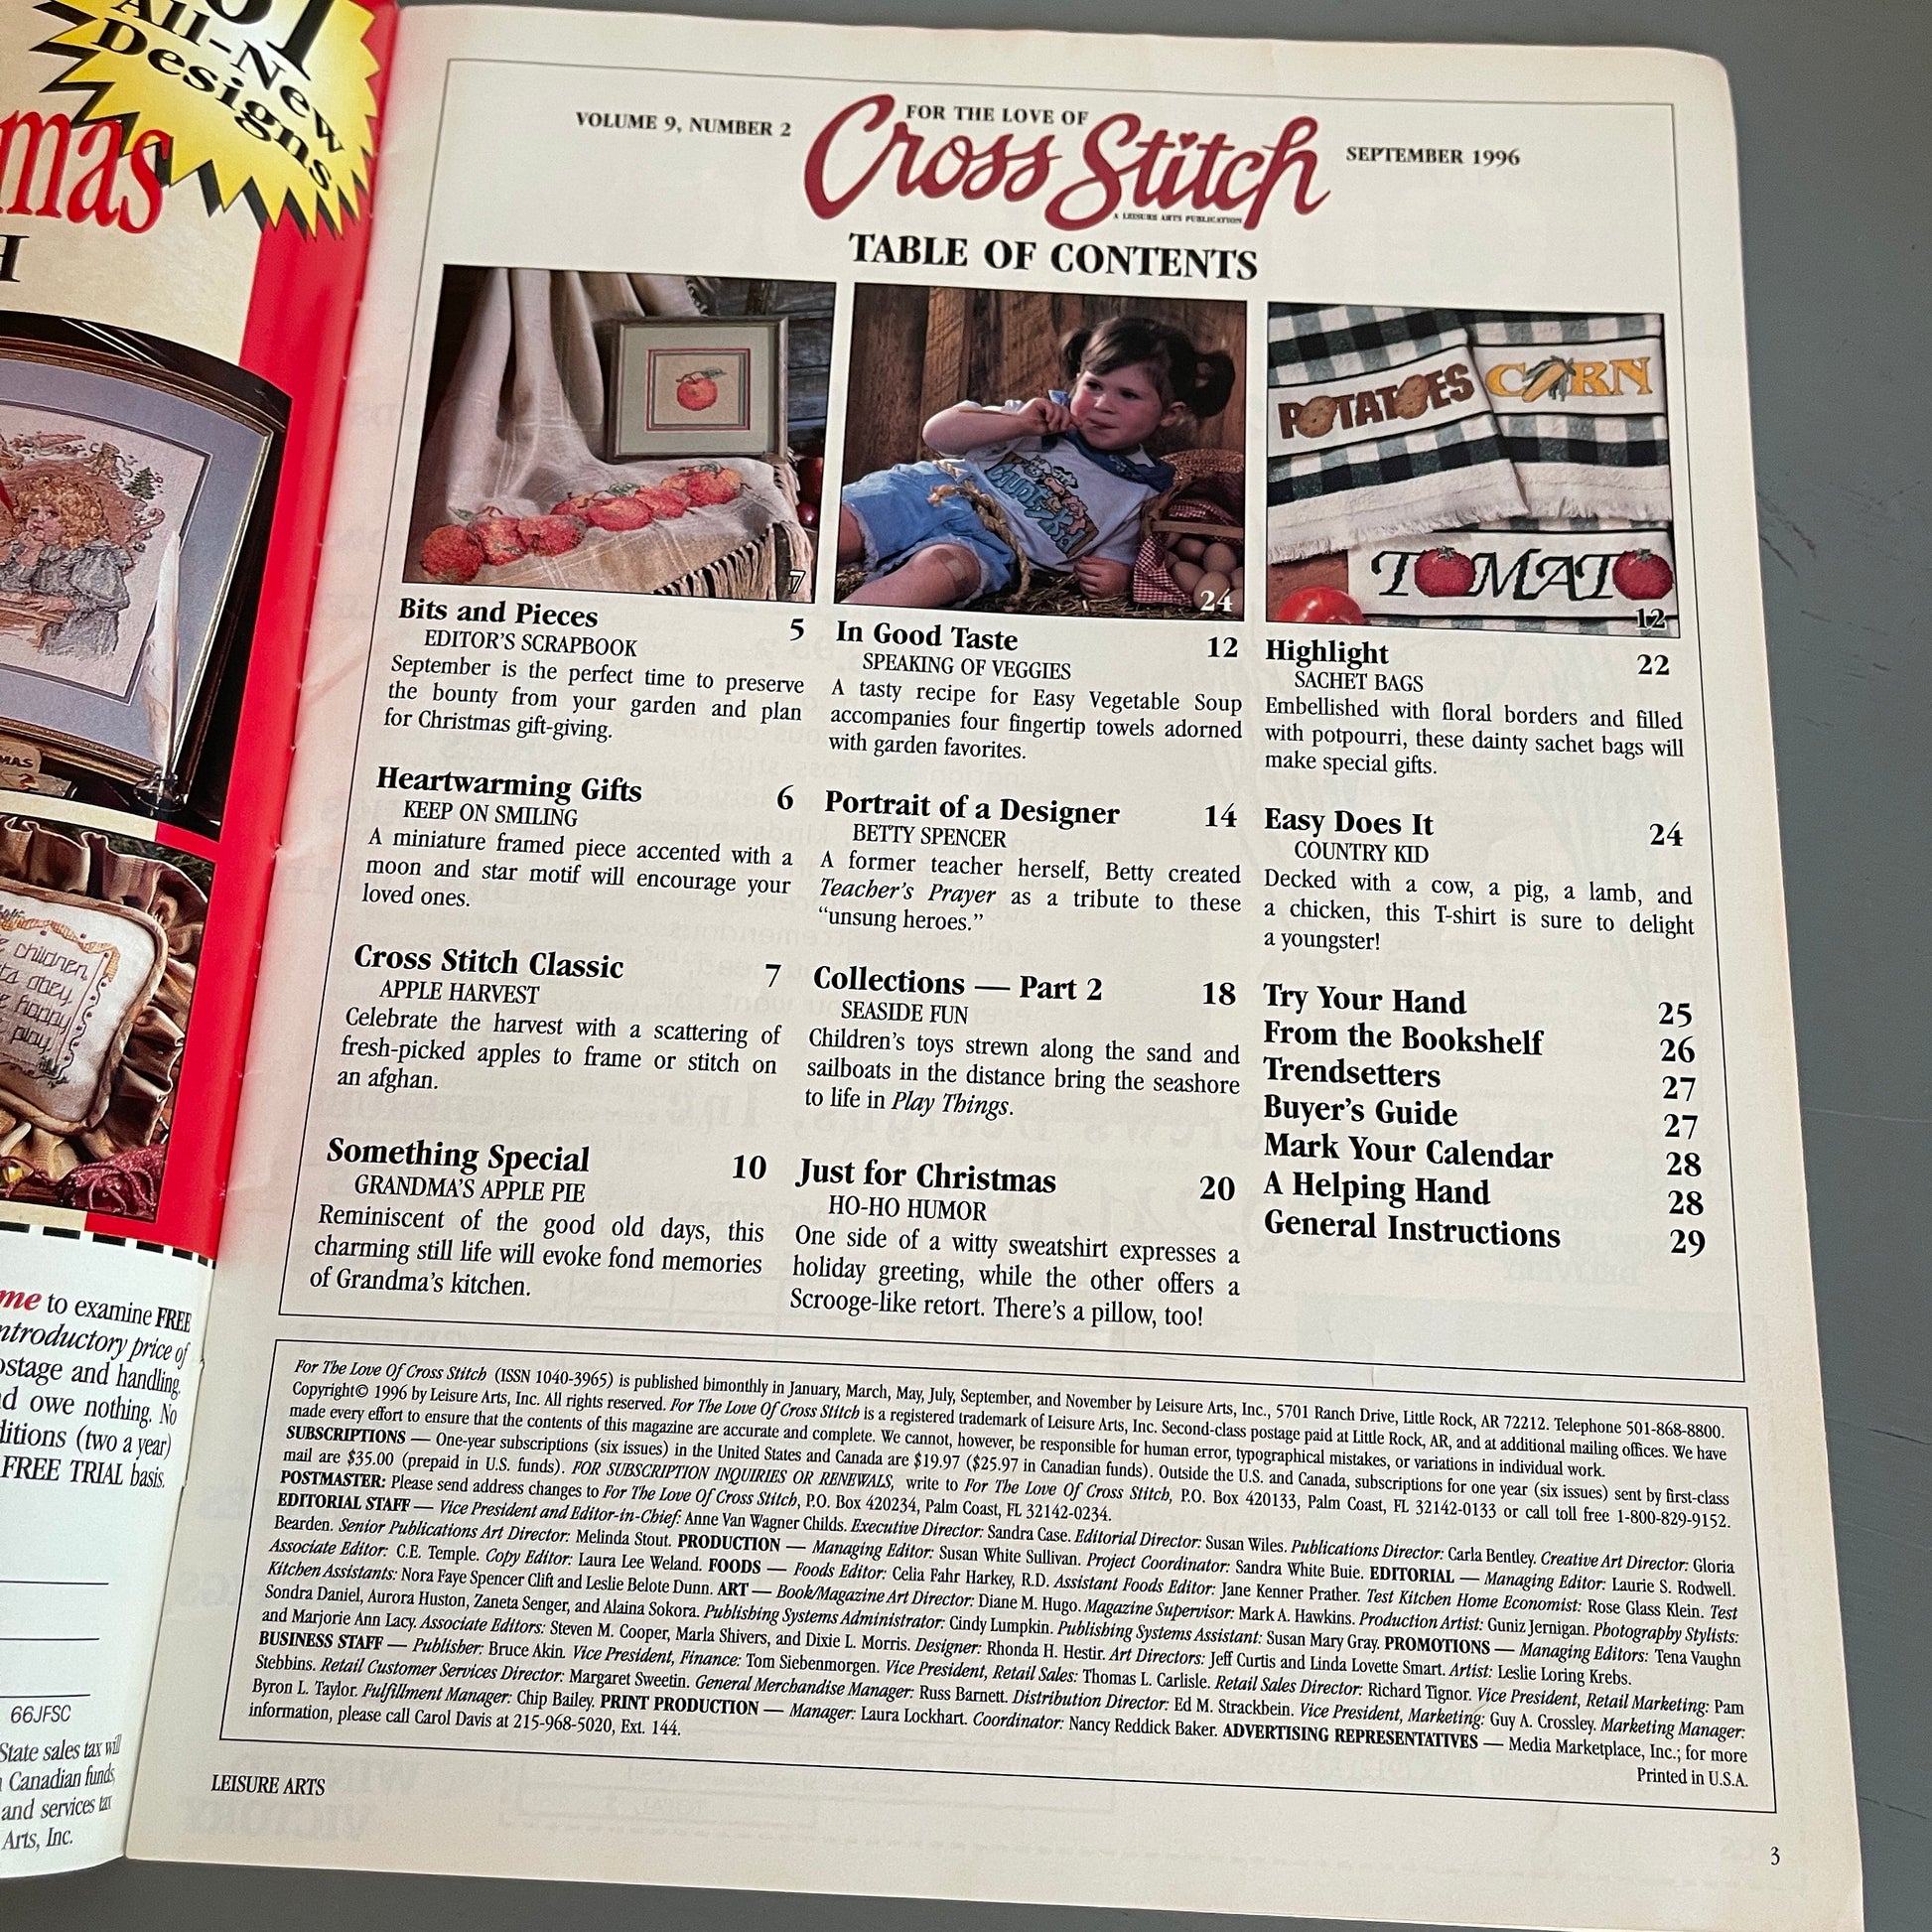 For the Love of Cross Stitch, September 1996, Counted Cross Stitch Magazine